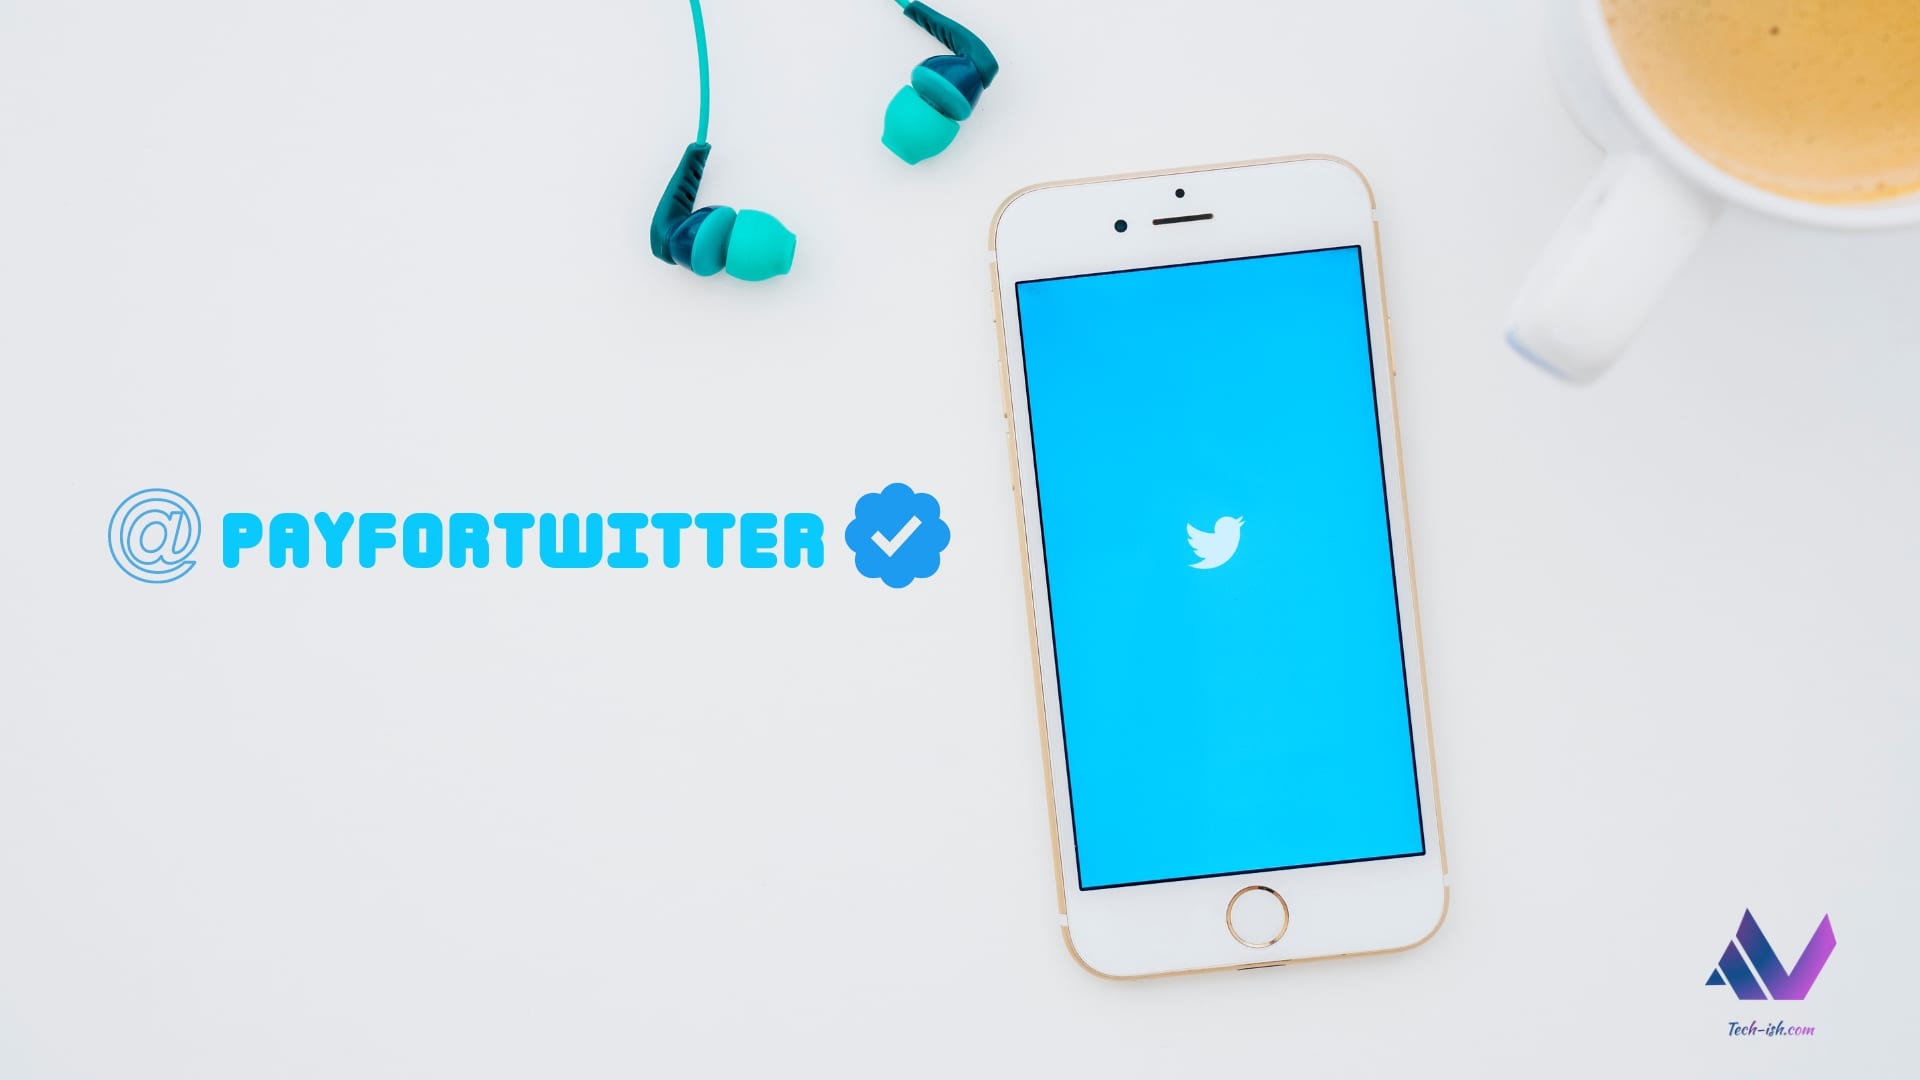 Twitter Blue now available in Kenya